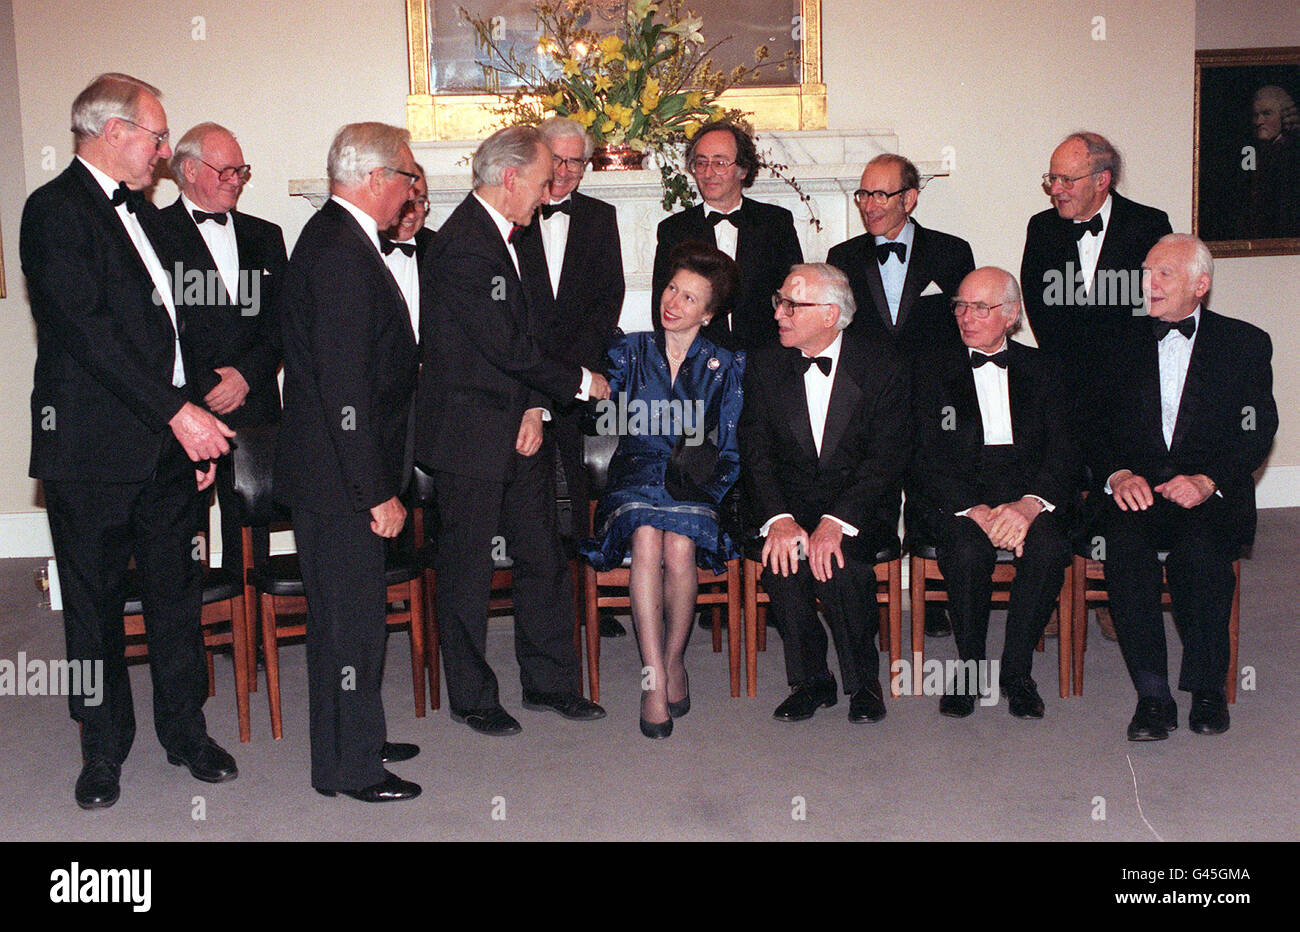 The Princess Royal speaks with guests attending the Nobel Laureates dinner in honour of Sir Harold Kato, winner of the 1996 Nobel Prize for Chemistry, at the Royal Society in London this evening (Wed). Photo by Stefan Rousseau/PA. WPA. Stock Photo